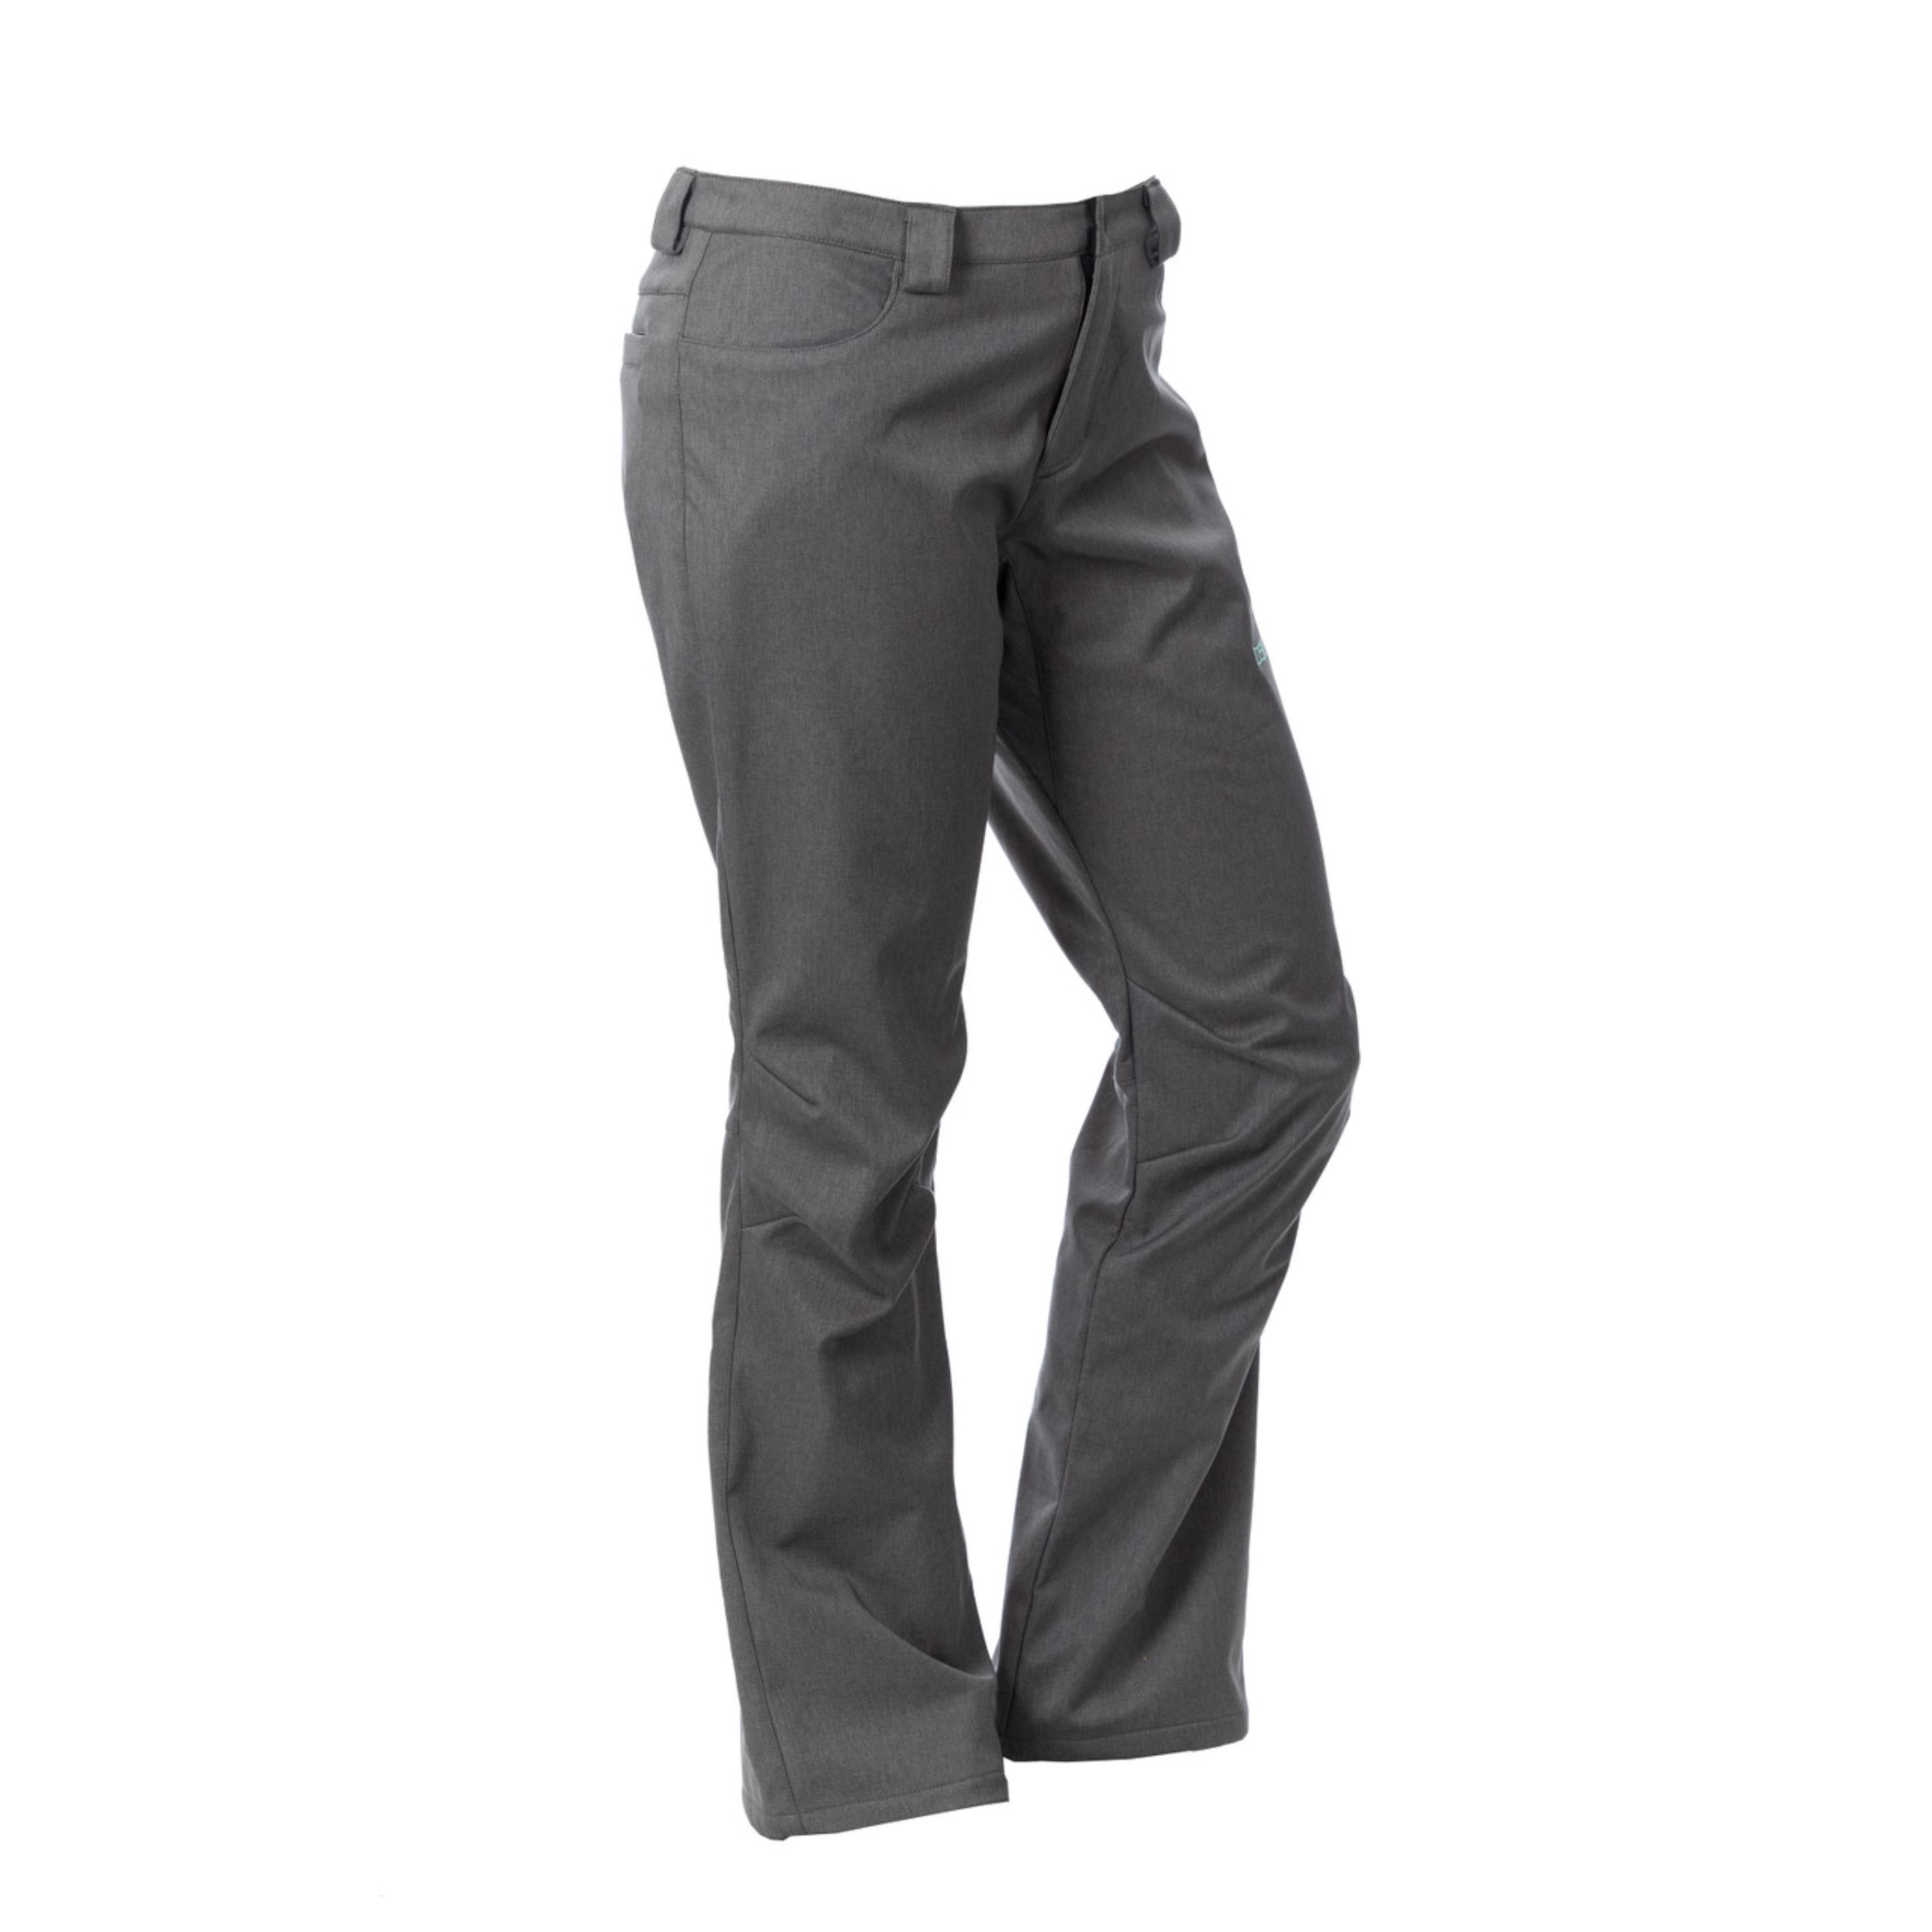 The North Face Apex Sth Women's Pants in Black. Size L